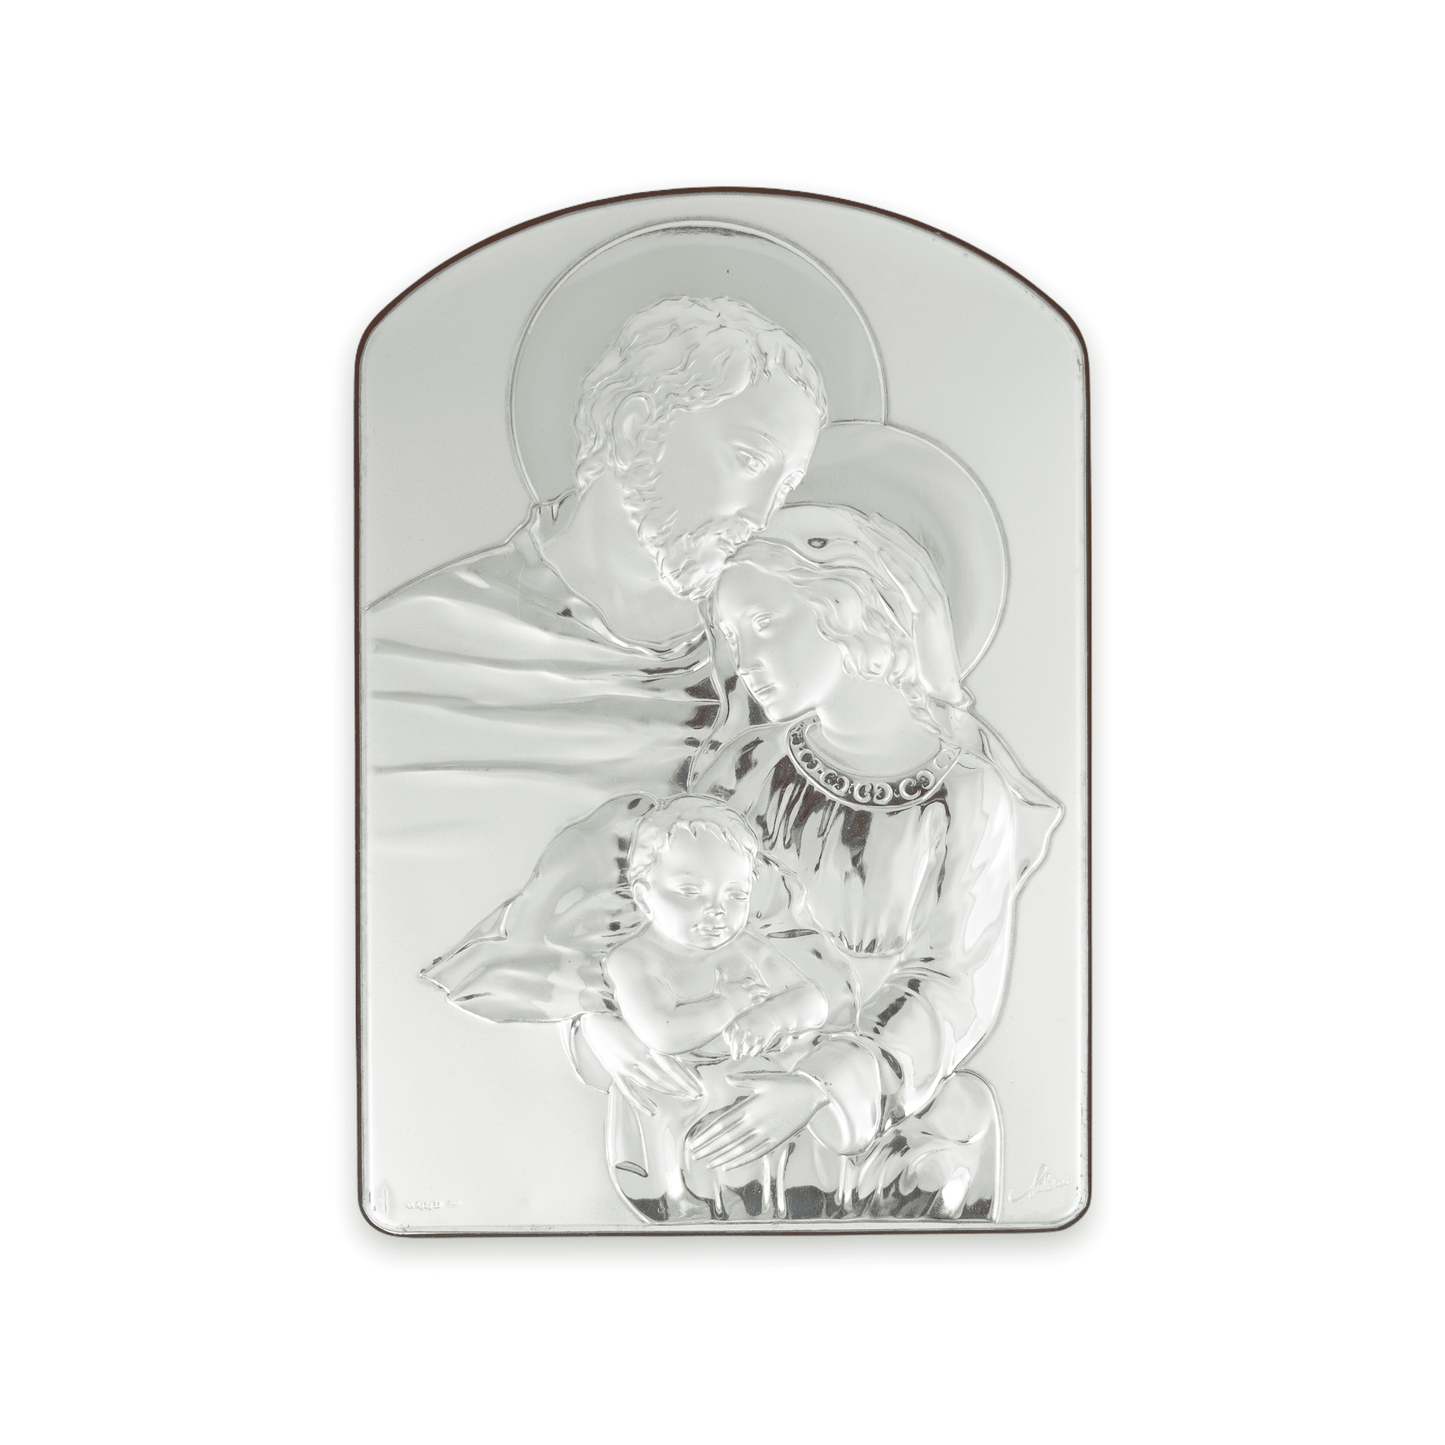 MONDO CATTOLICO Holy Family Painting Sterling Silver Bilaminate